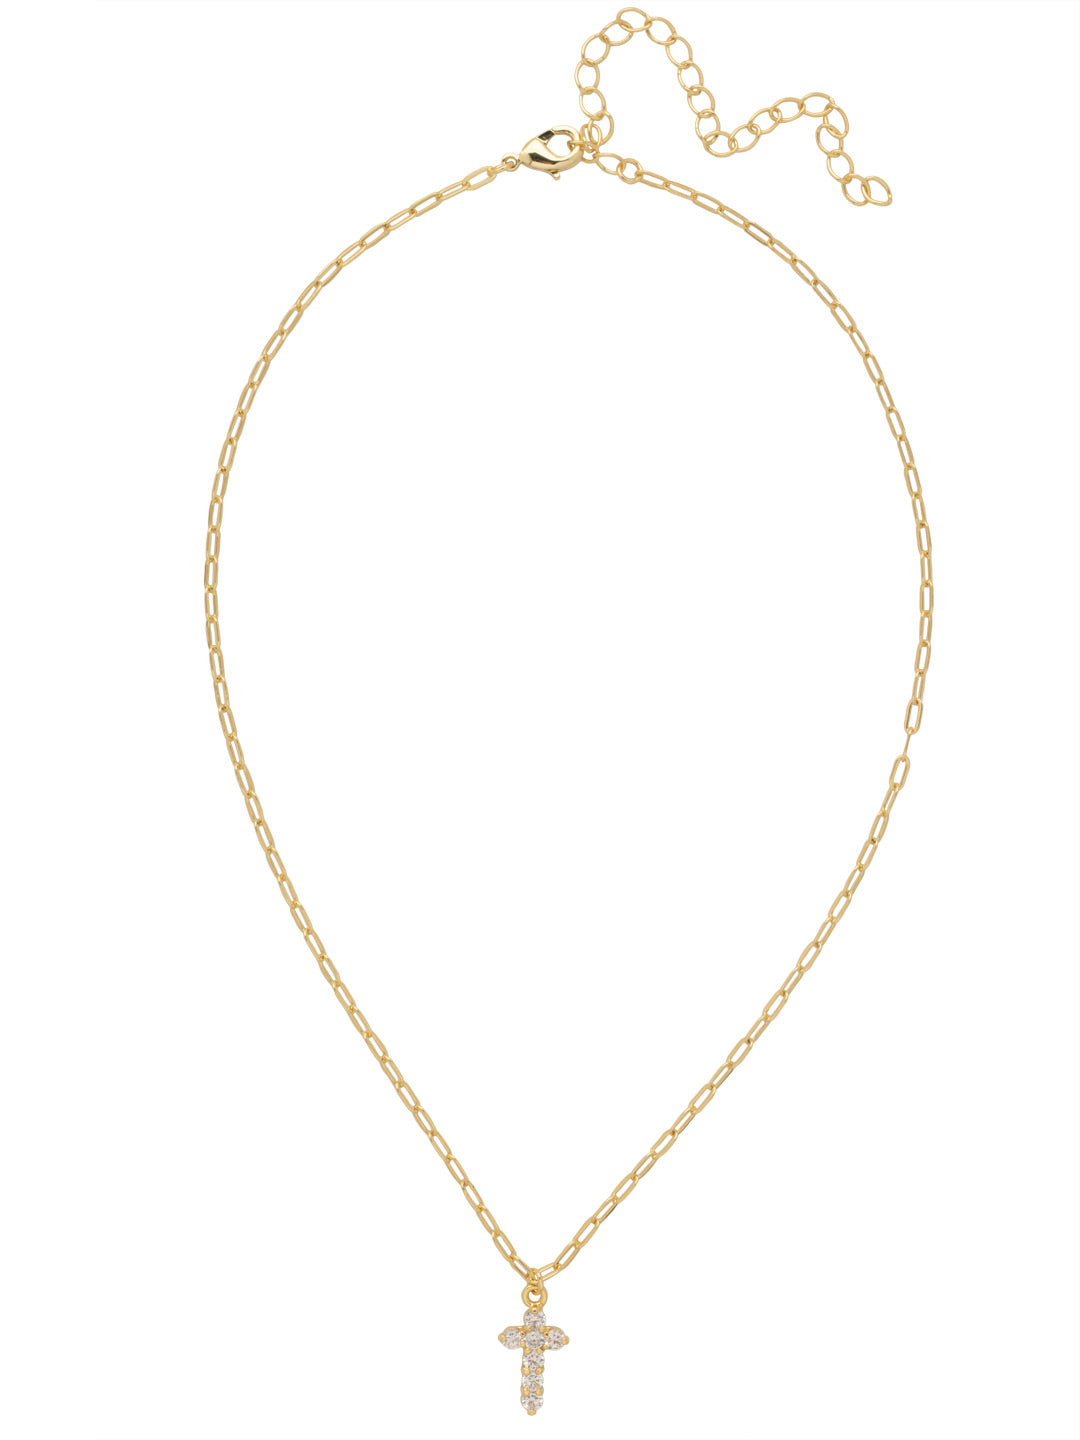 Crystal Cross Pendant Necklace - NFM7BGCRY - <p>The Crystal Cross Pendant Necklace features a crystal embellished cross pendant on a mini adjustable paperclip chain necklace, secured with a lobster claw clasp. From Sorrelli's Crystal collection in our Bright Gold-tone finish.</p>